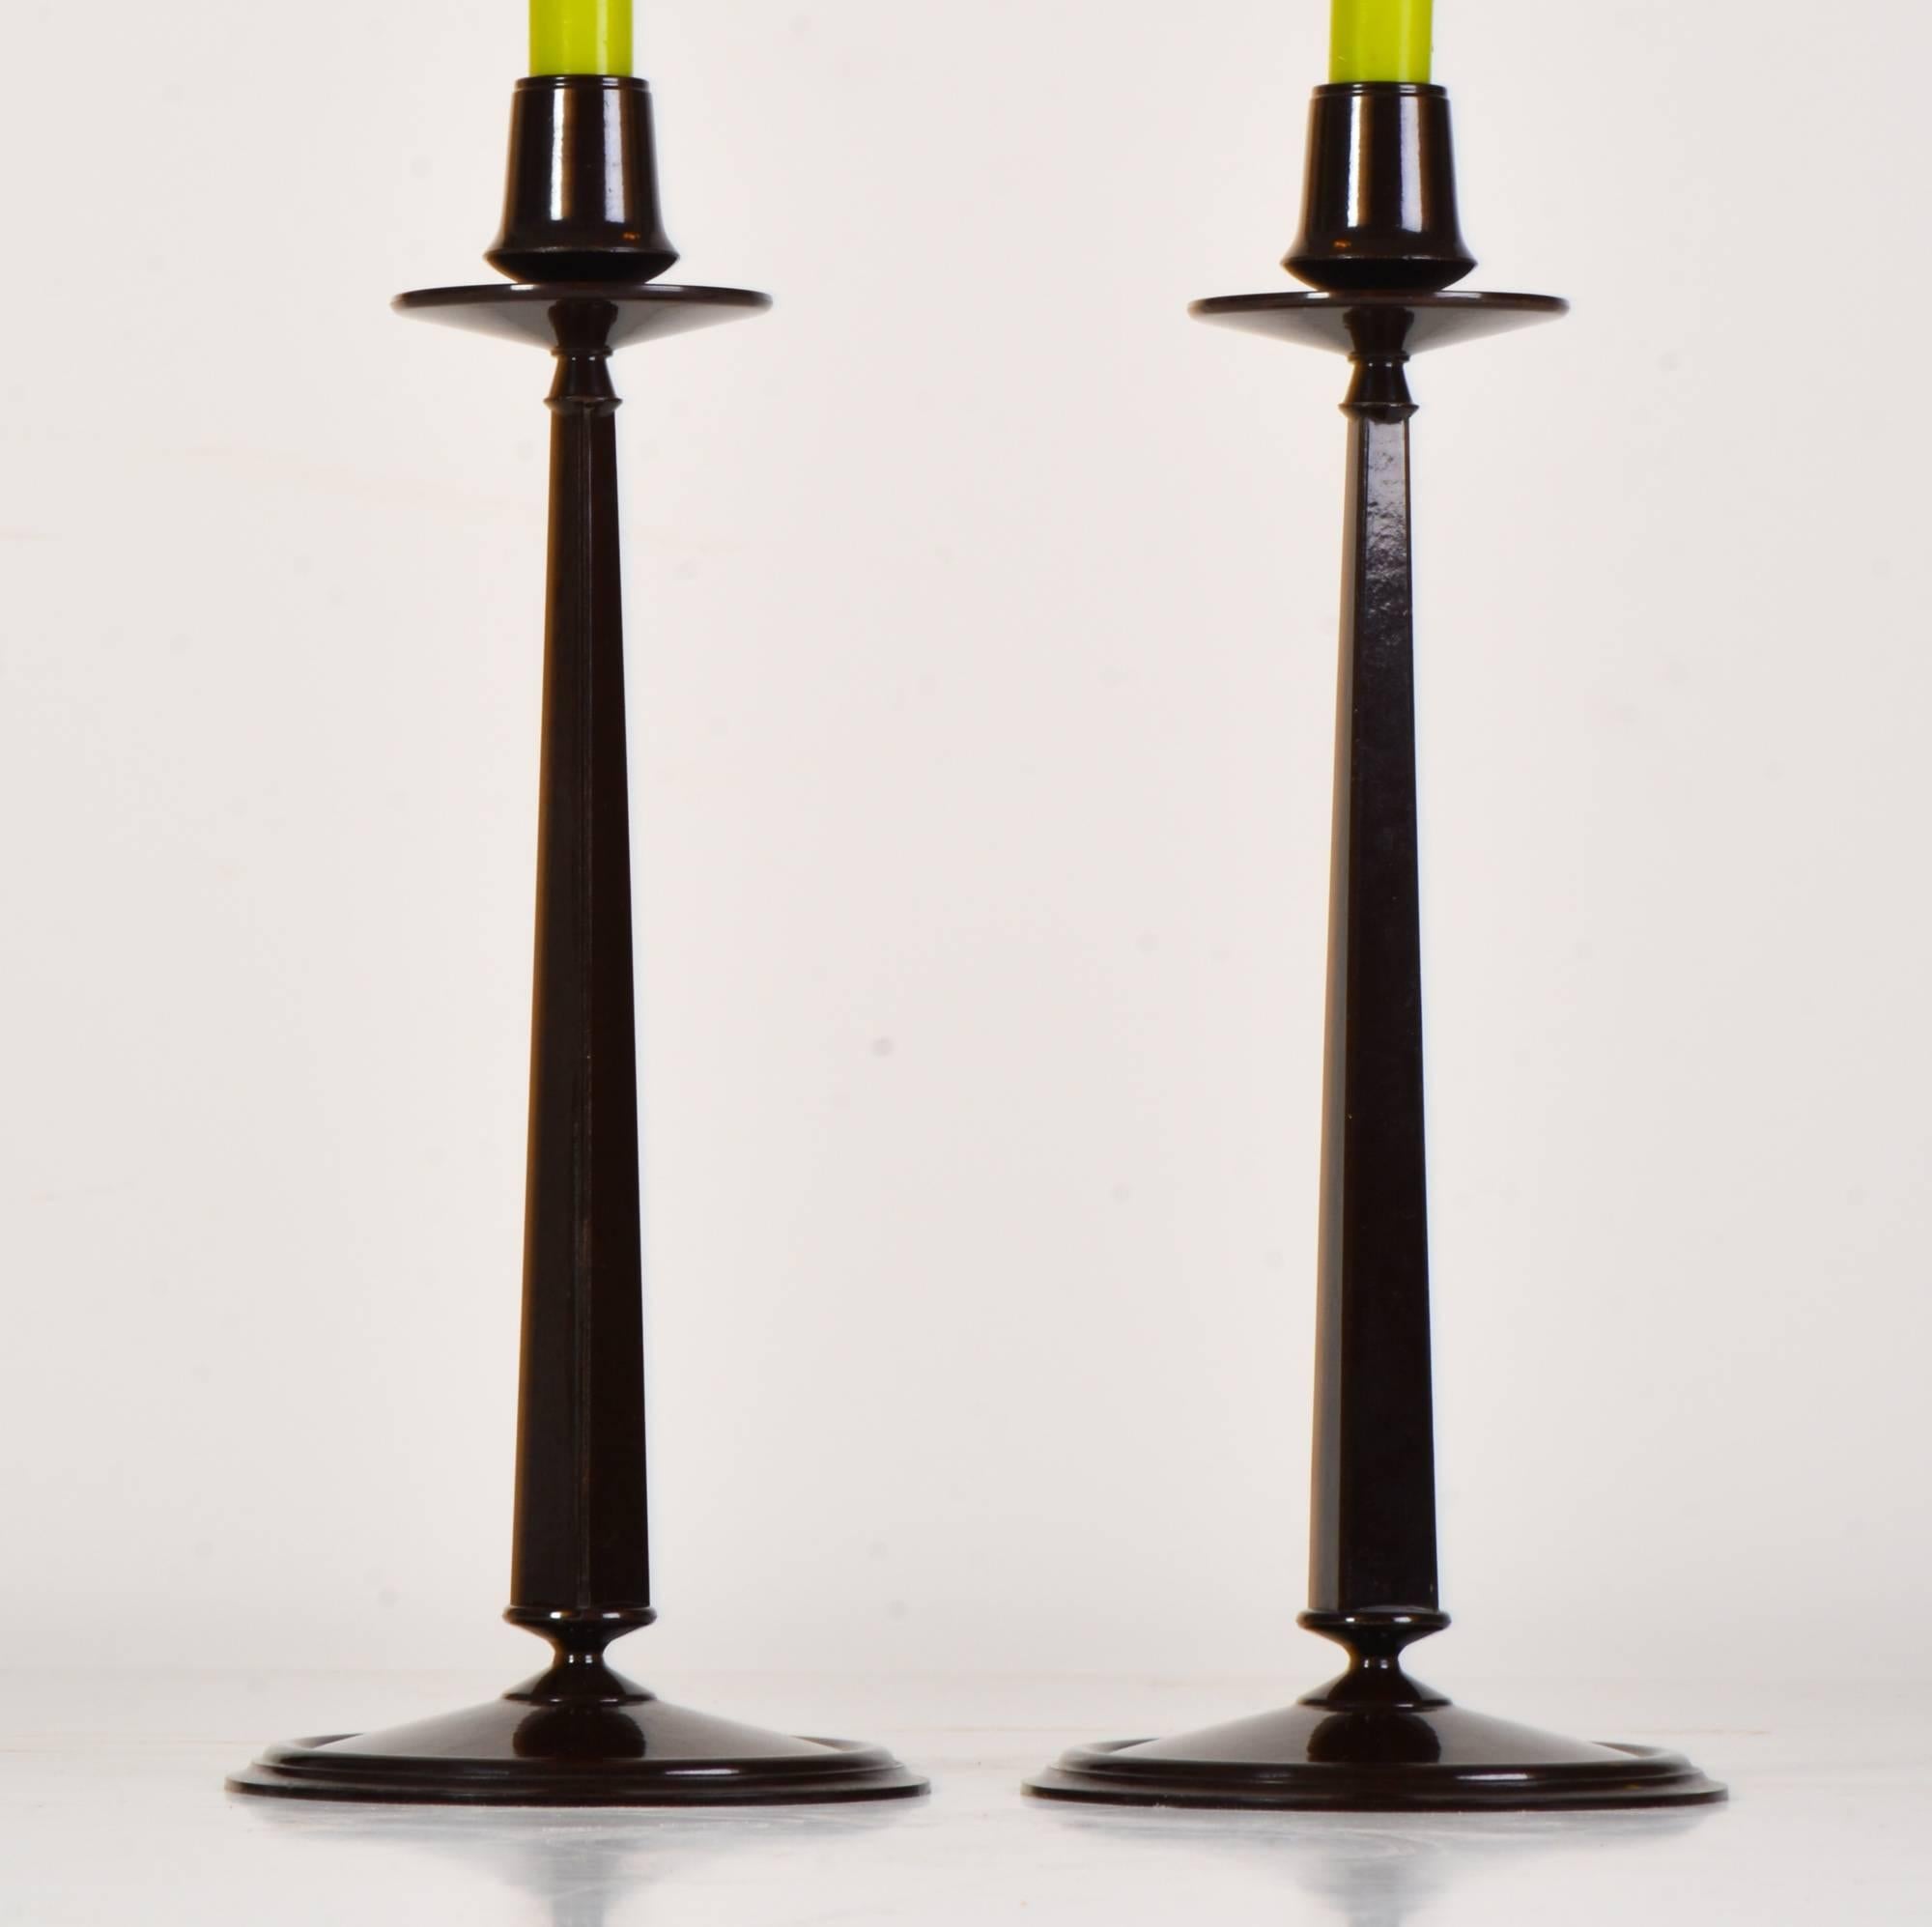 English Pair of Bakelite Candlesticks by Charles R. Mackintosh For Sale